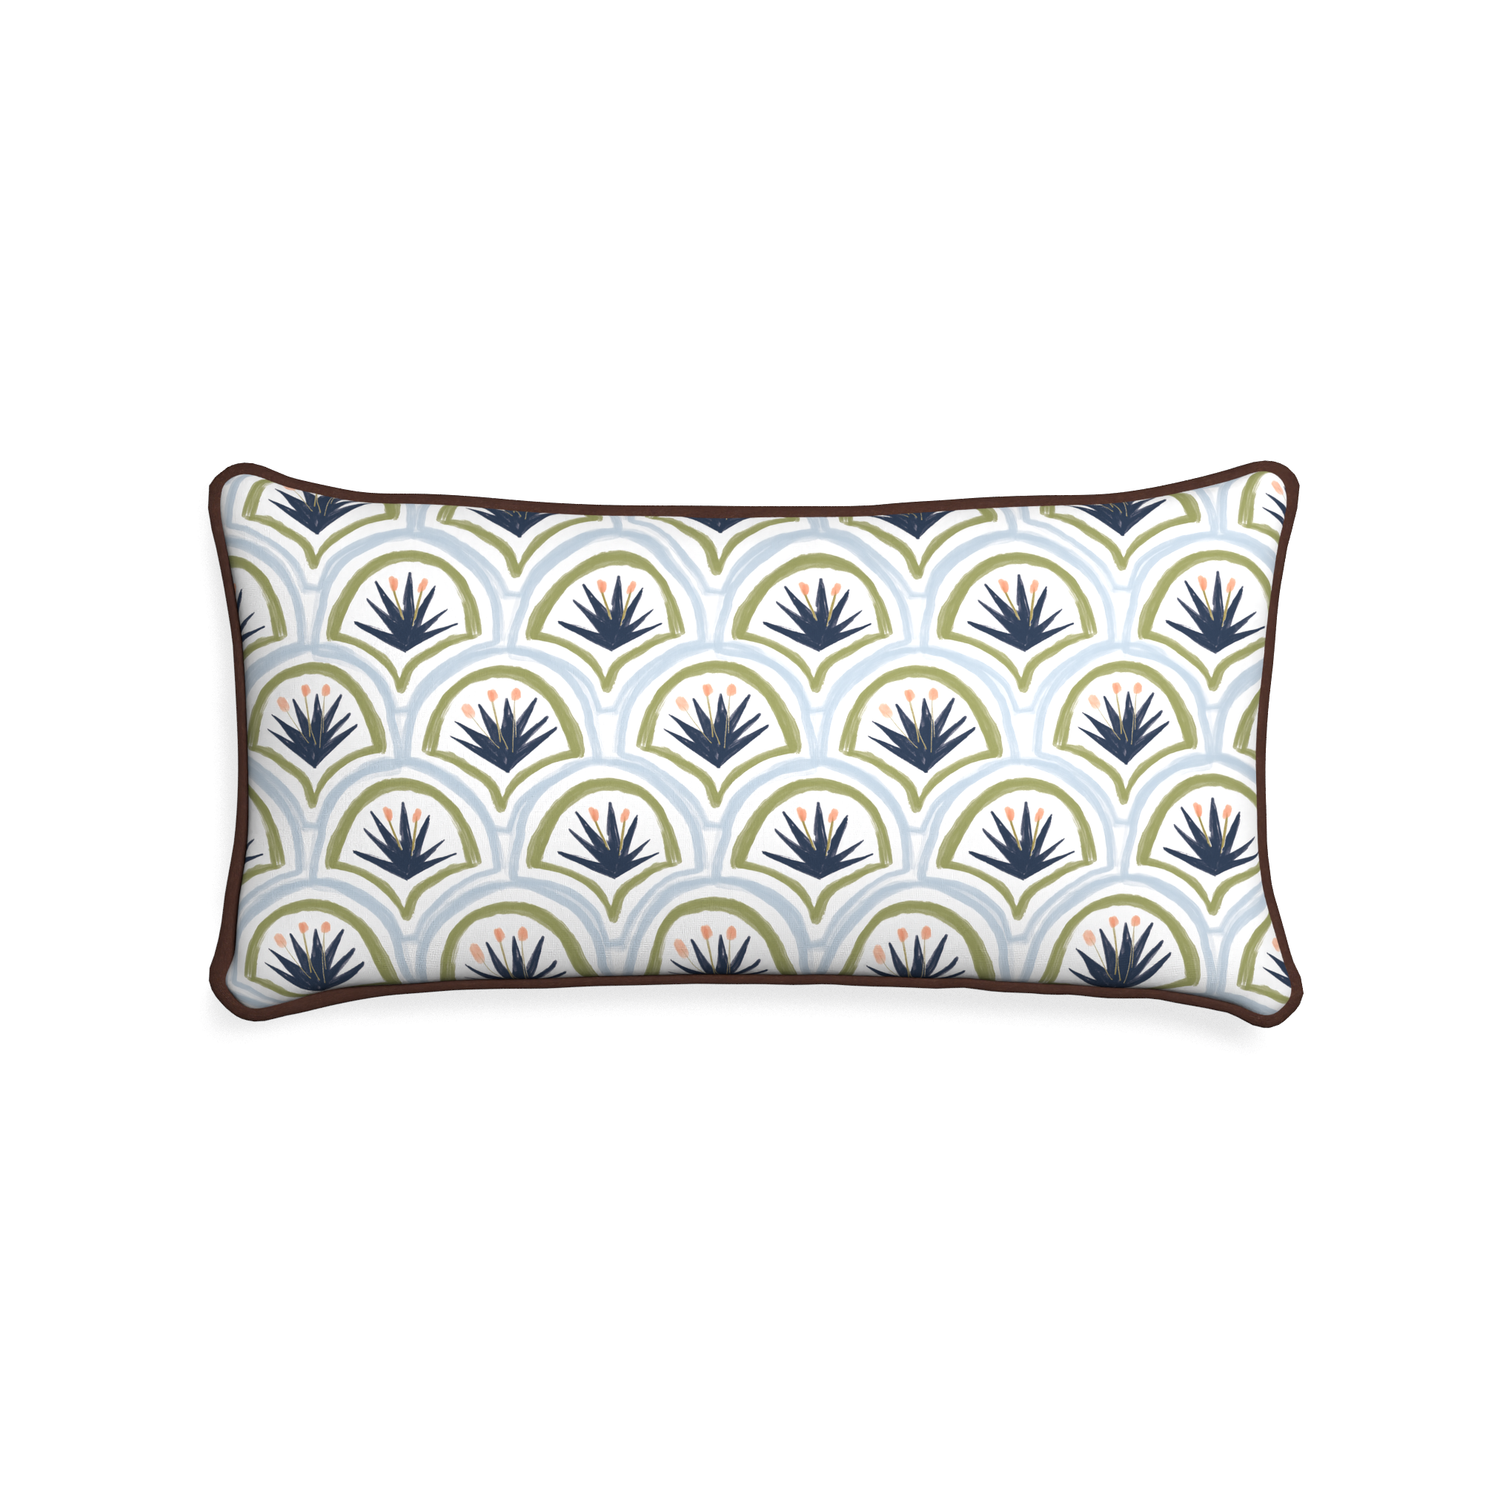 Midi-lumbar thatcher midnight custom art deco palm patternpillow with w piping on white background